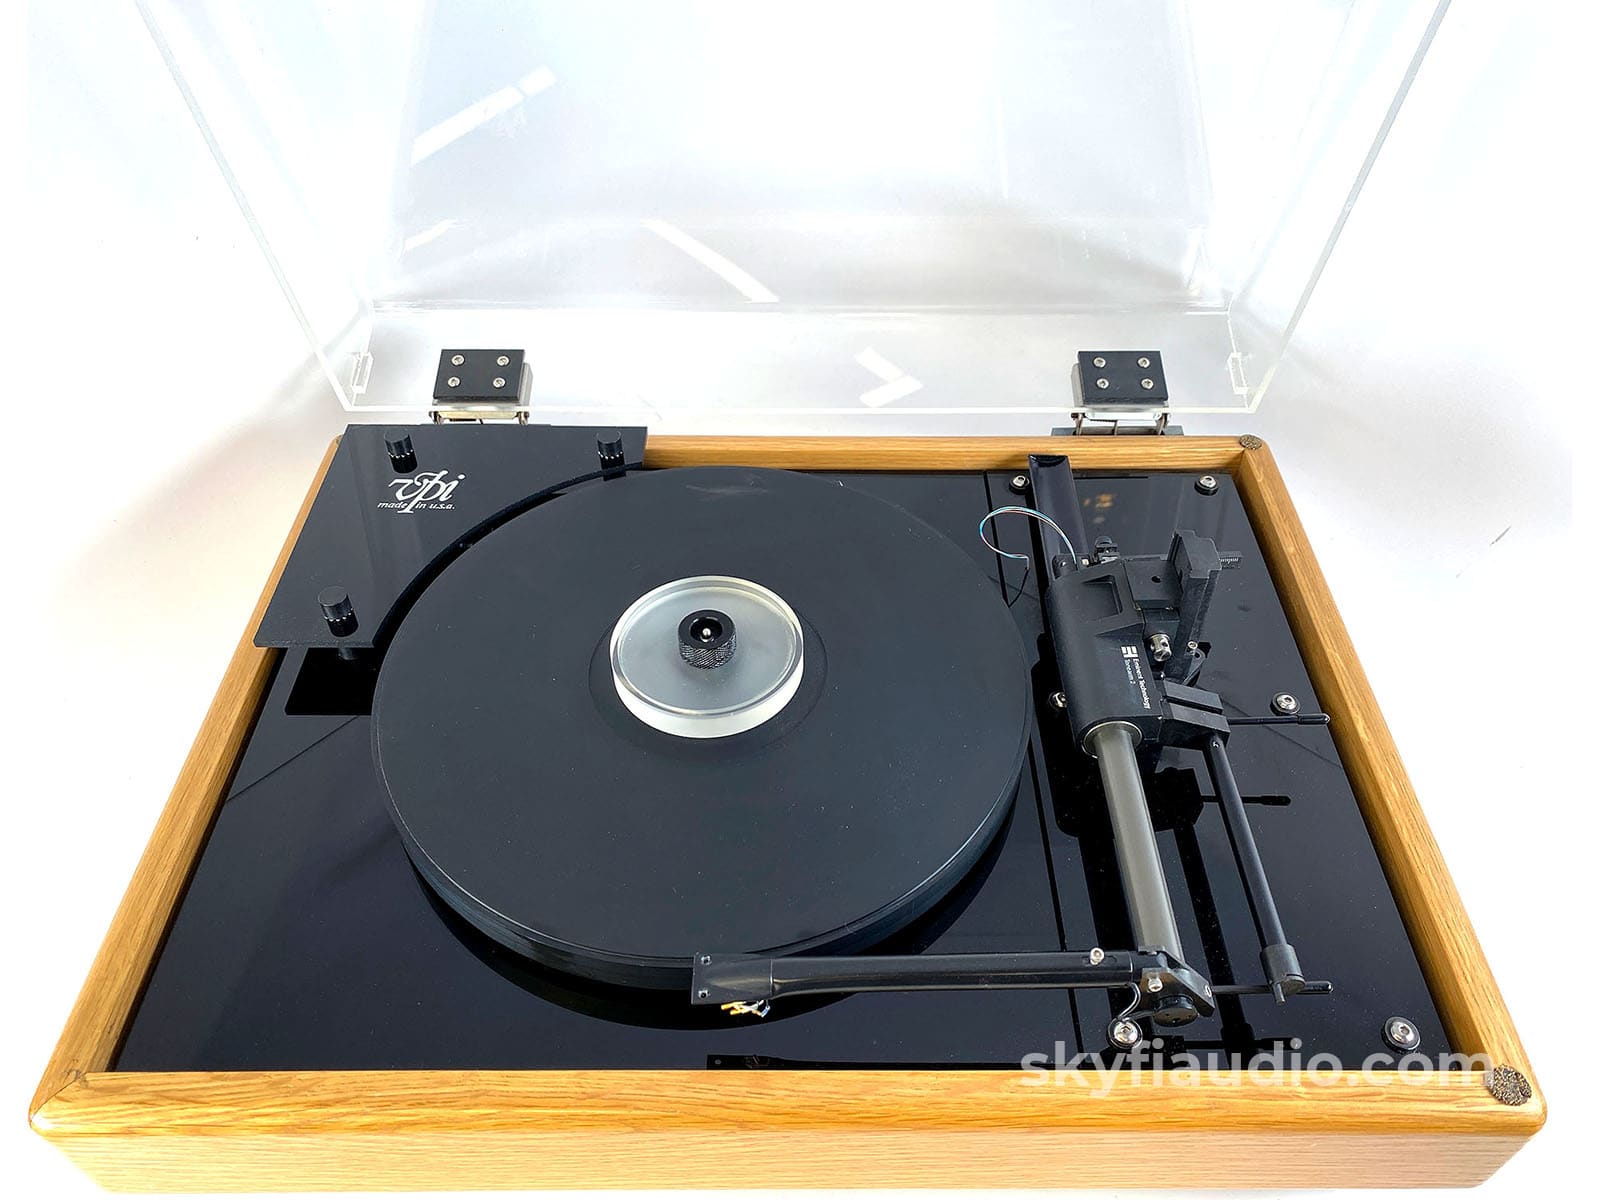 Vpi Hw-19 Turntable With Tangential Tonearm And Pump - In Light Oak With New Sumiko Cartridge